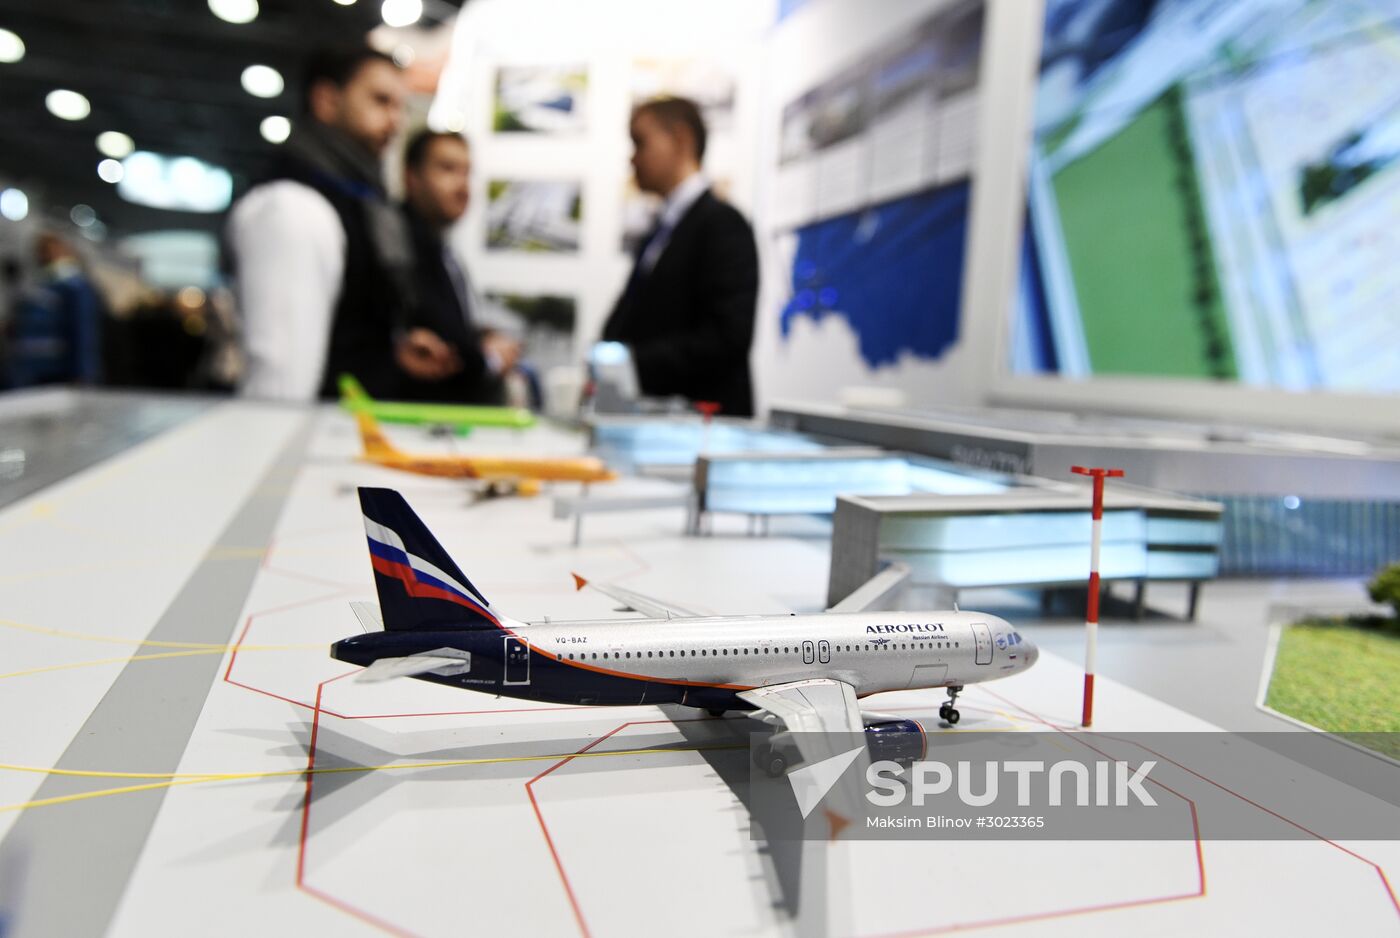 2017 National Aviation Infrastructure Show in Moscow.